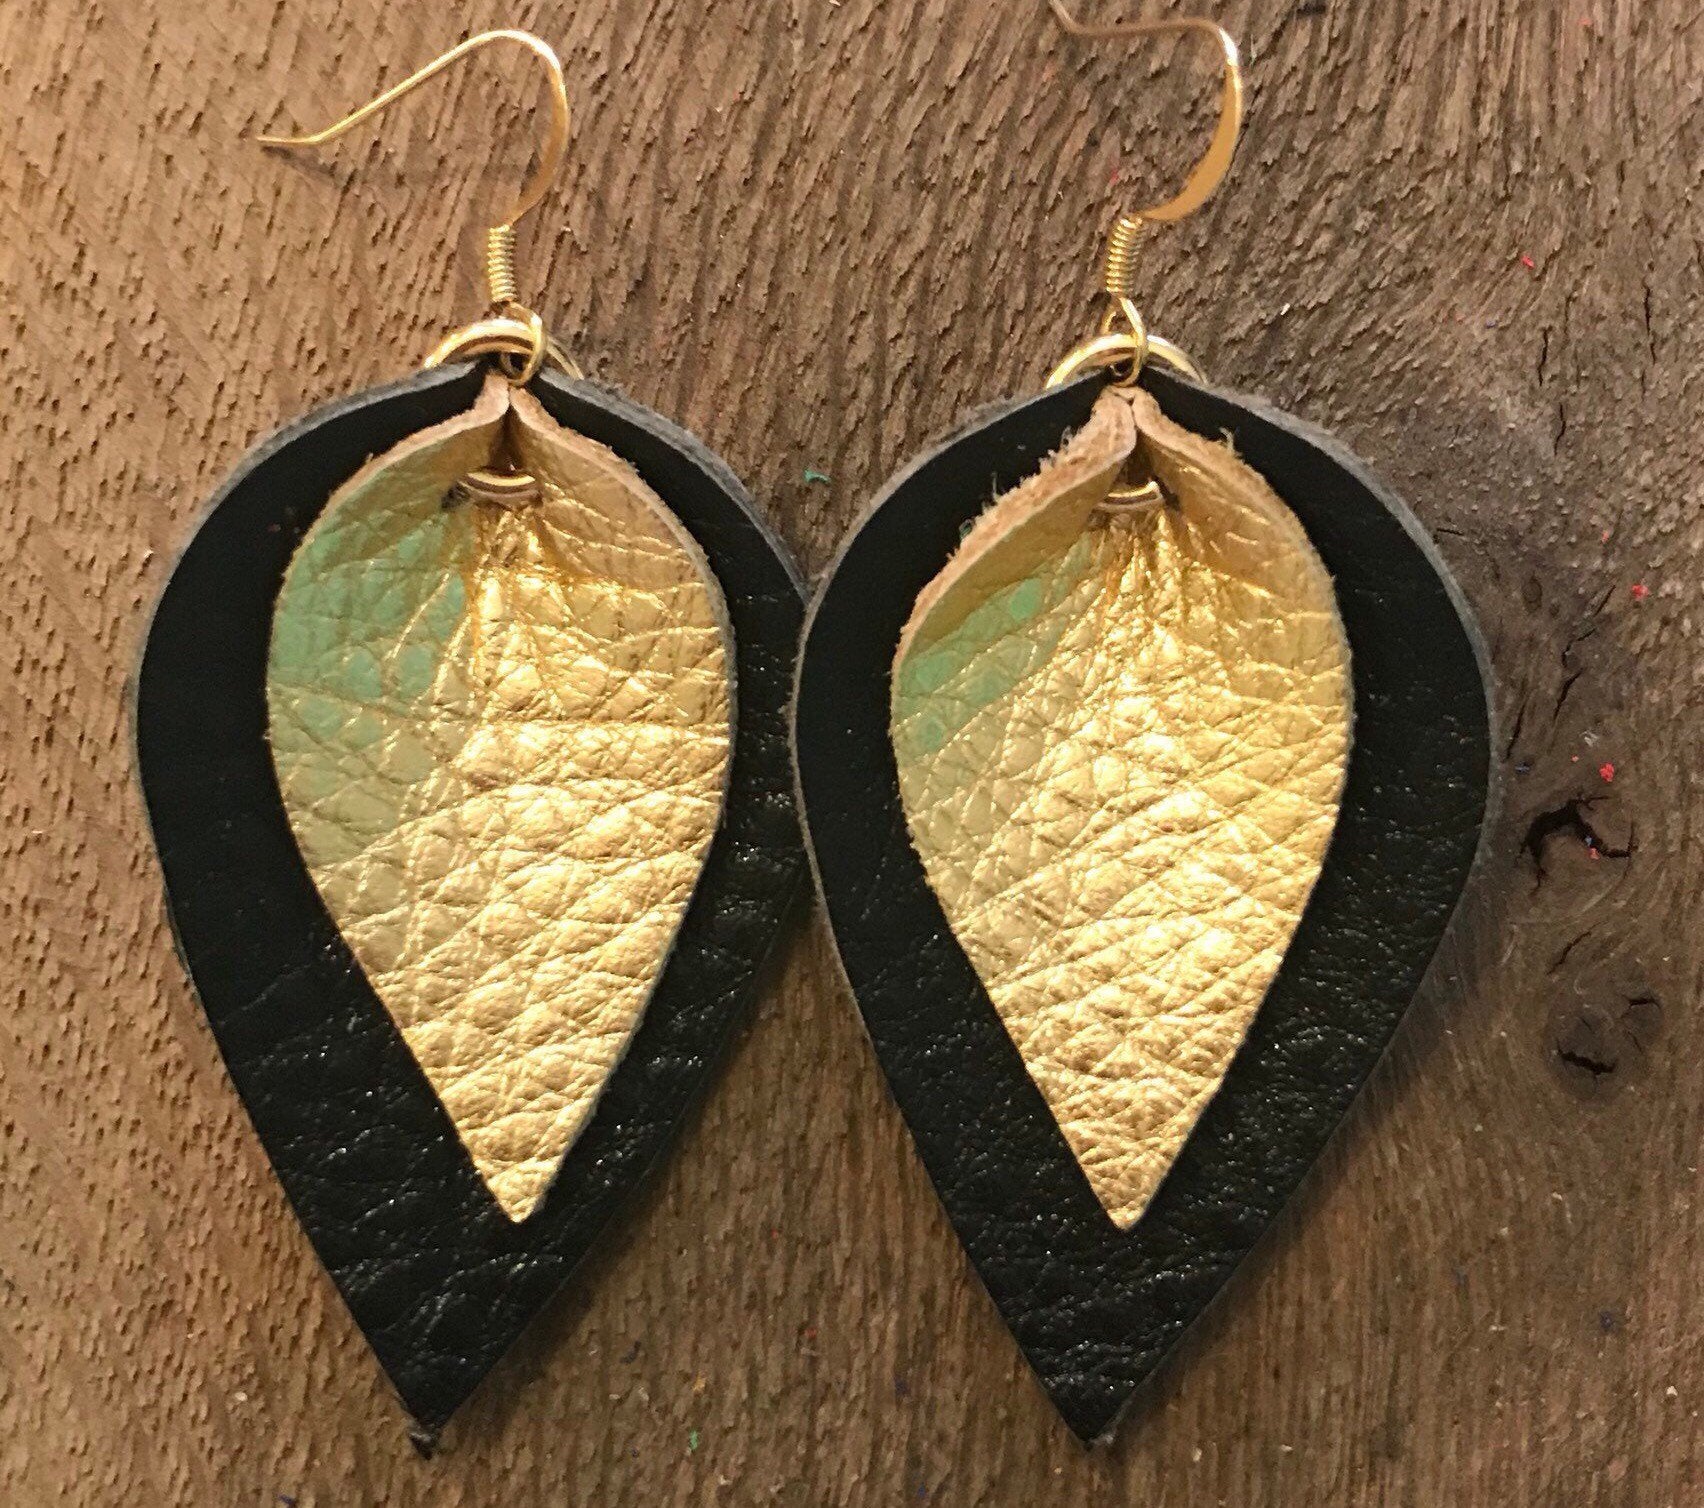 katie-double-layered-leather-leaf-shaped-earrings-in-black-and-metallic-gold